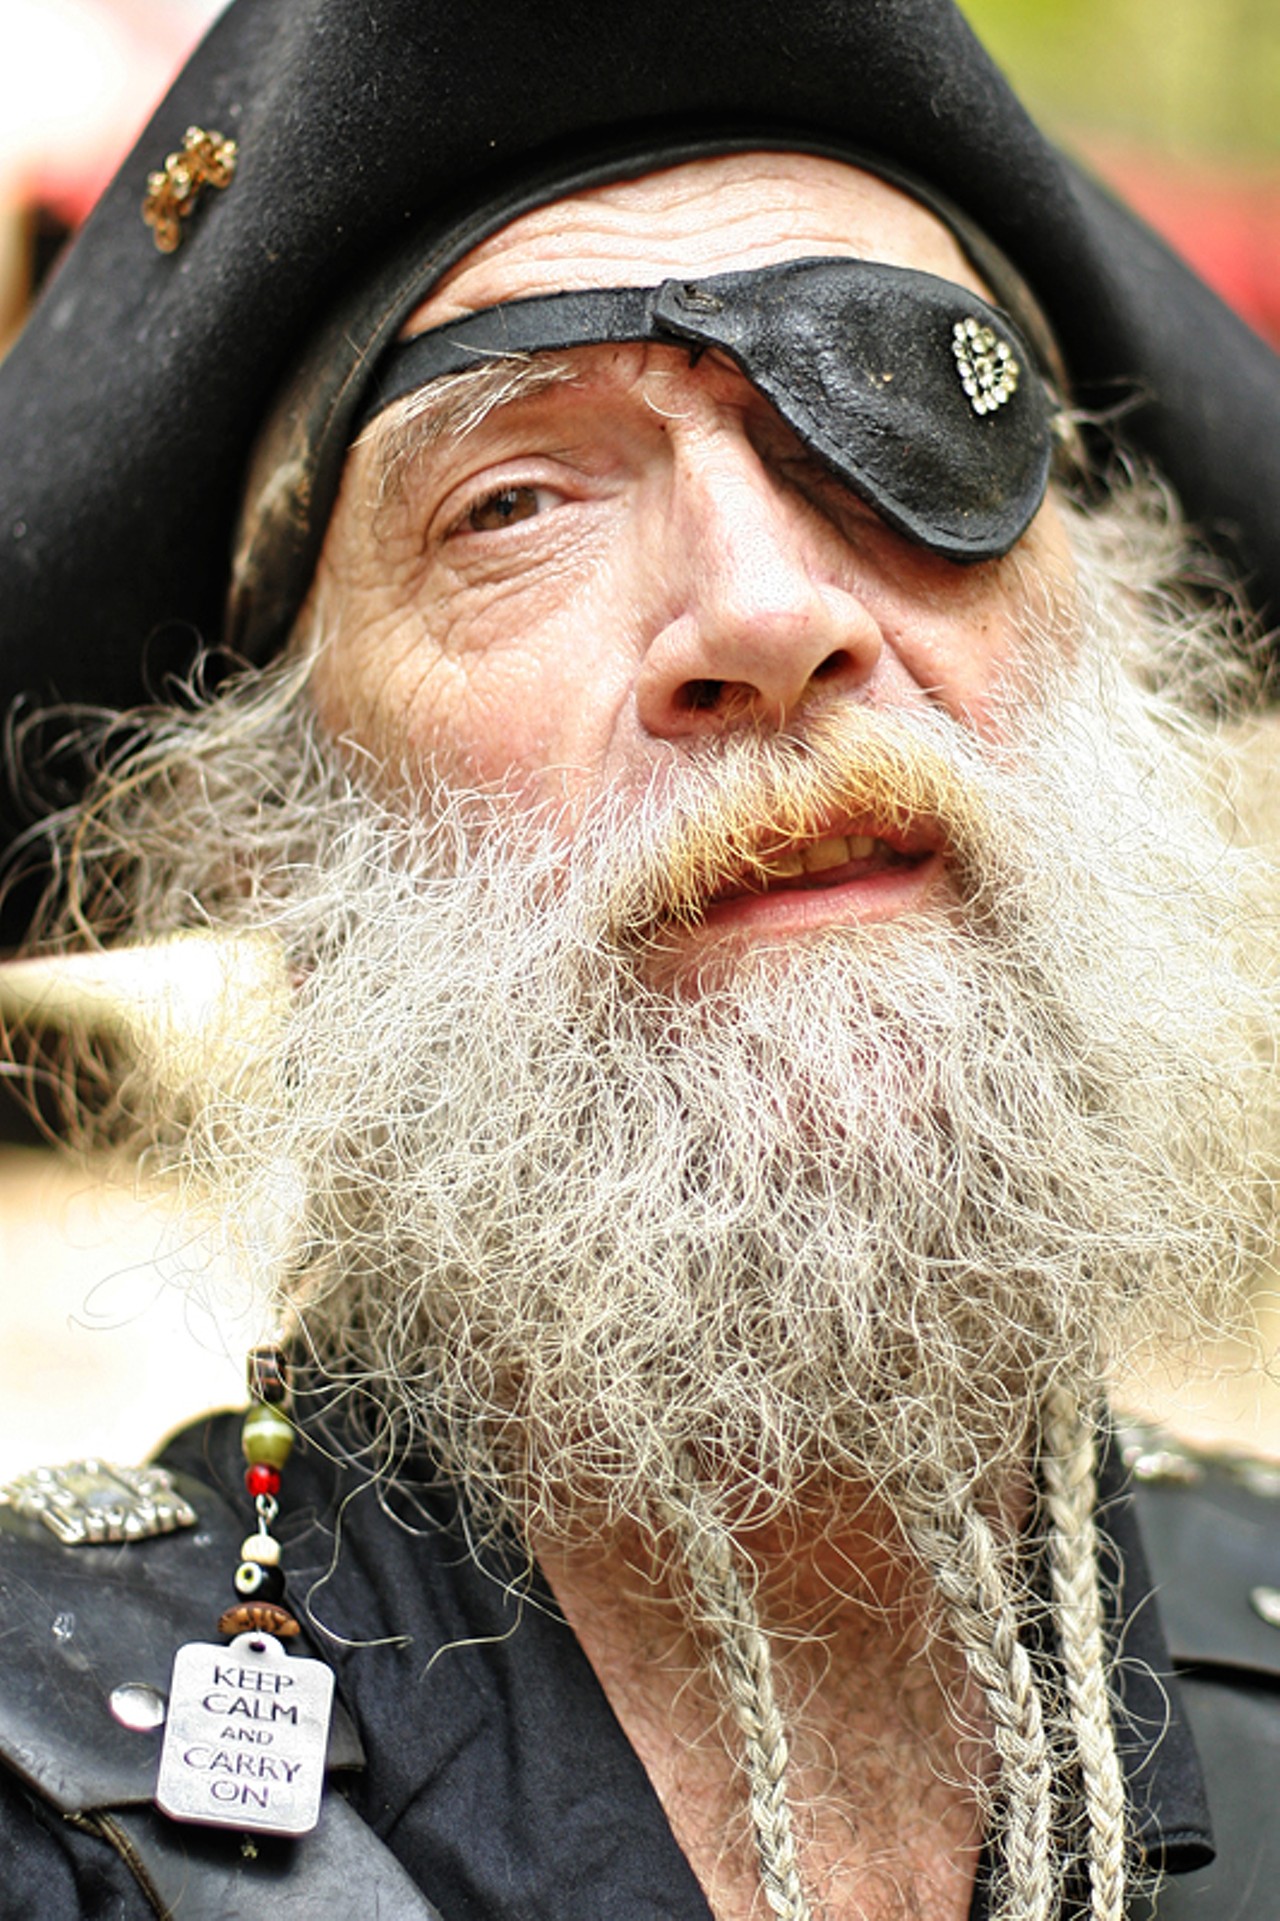 "Life's pretty good, and why wouldn't it be? I'm a pirate, after all."